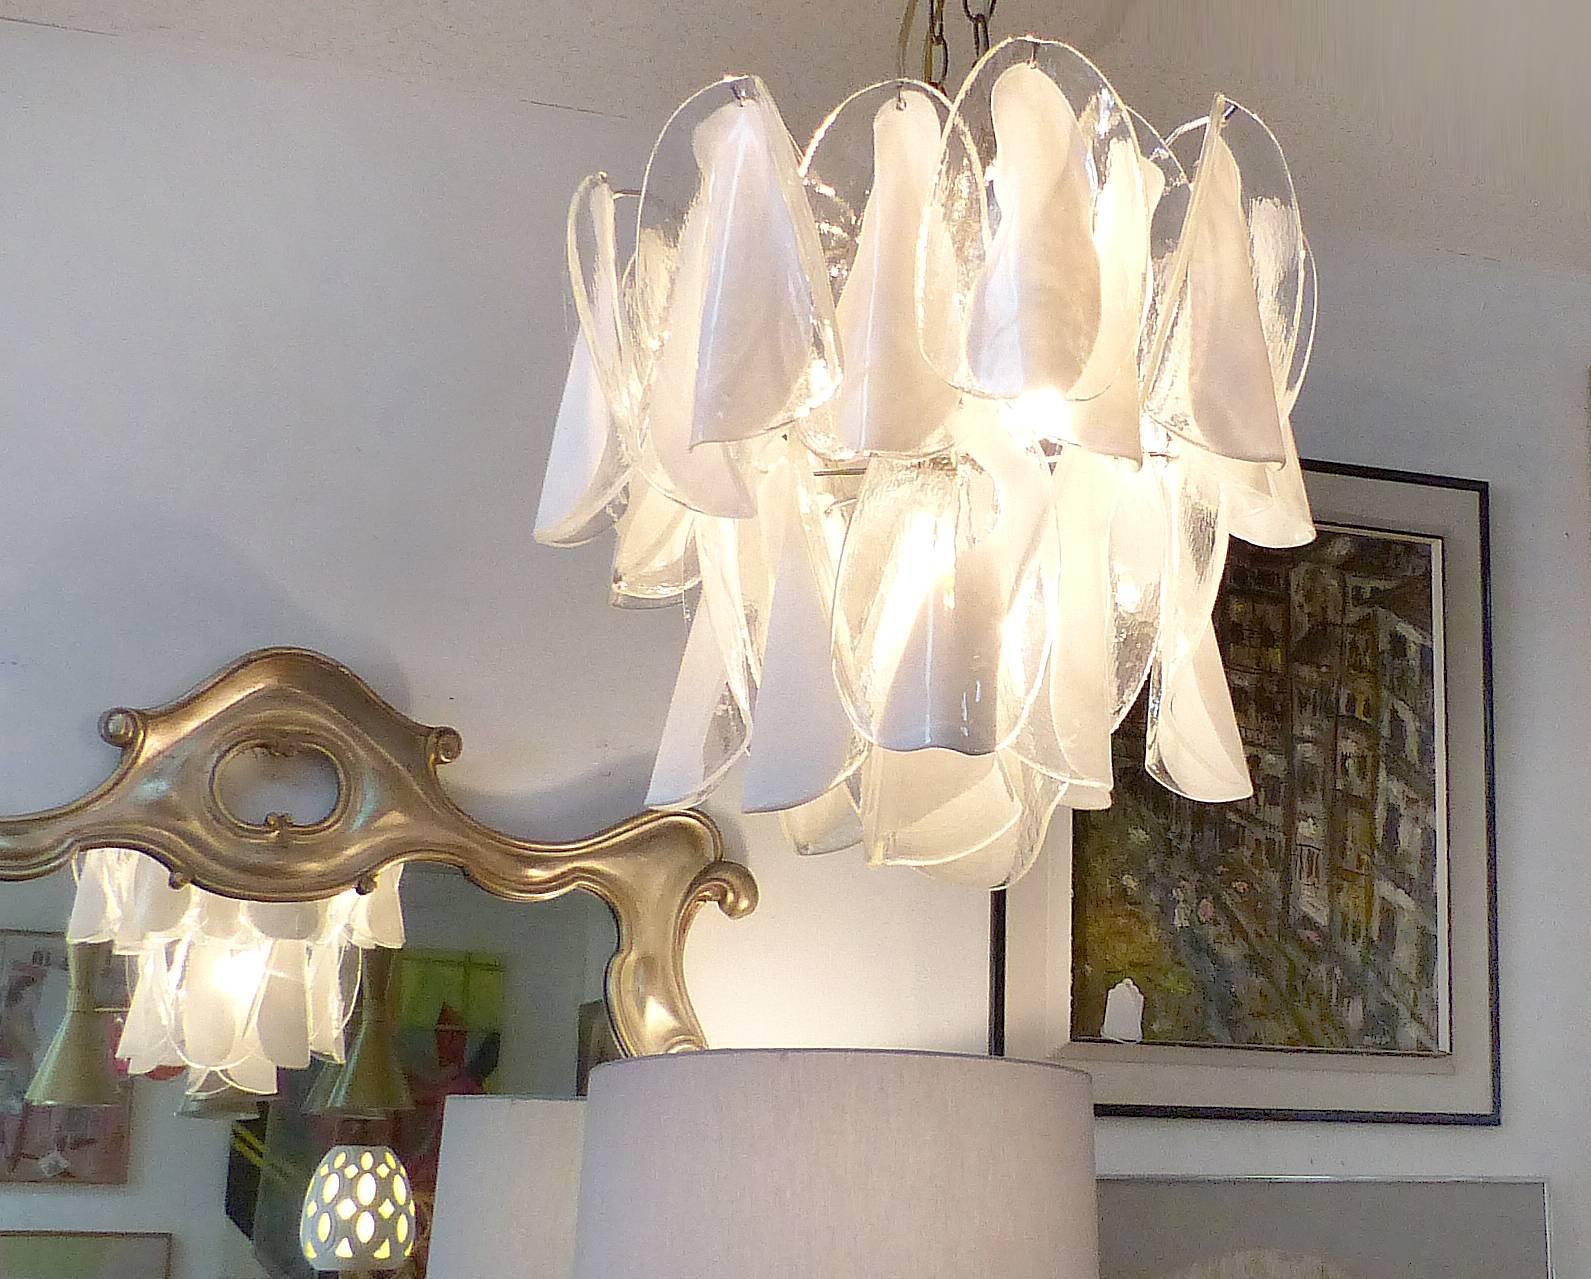 Offered for sale is a Mazzega Murano chandelier created with elegant handblown clear and white petals design, The two-tier Italian 1970s fixture has three standard chandelier bulbs above and a fourth which aims downward. The measurements given are